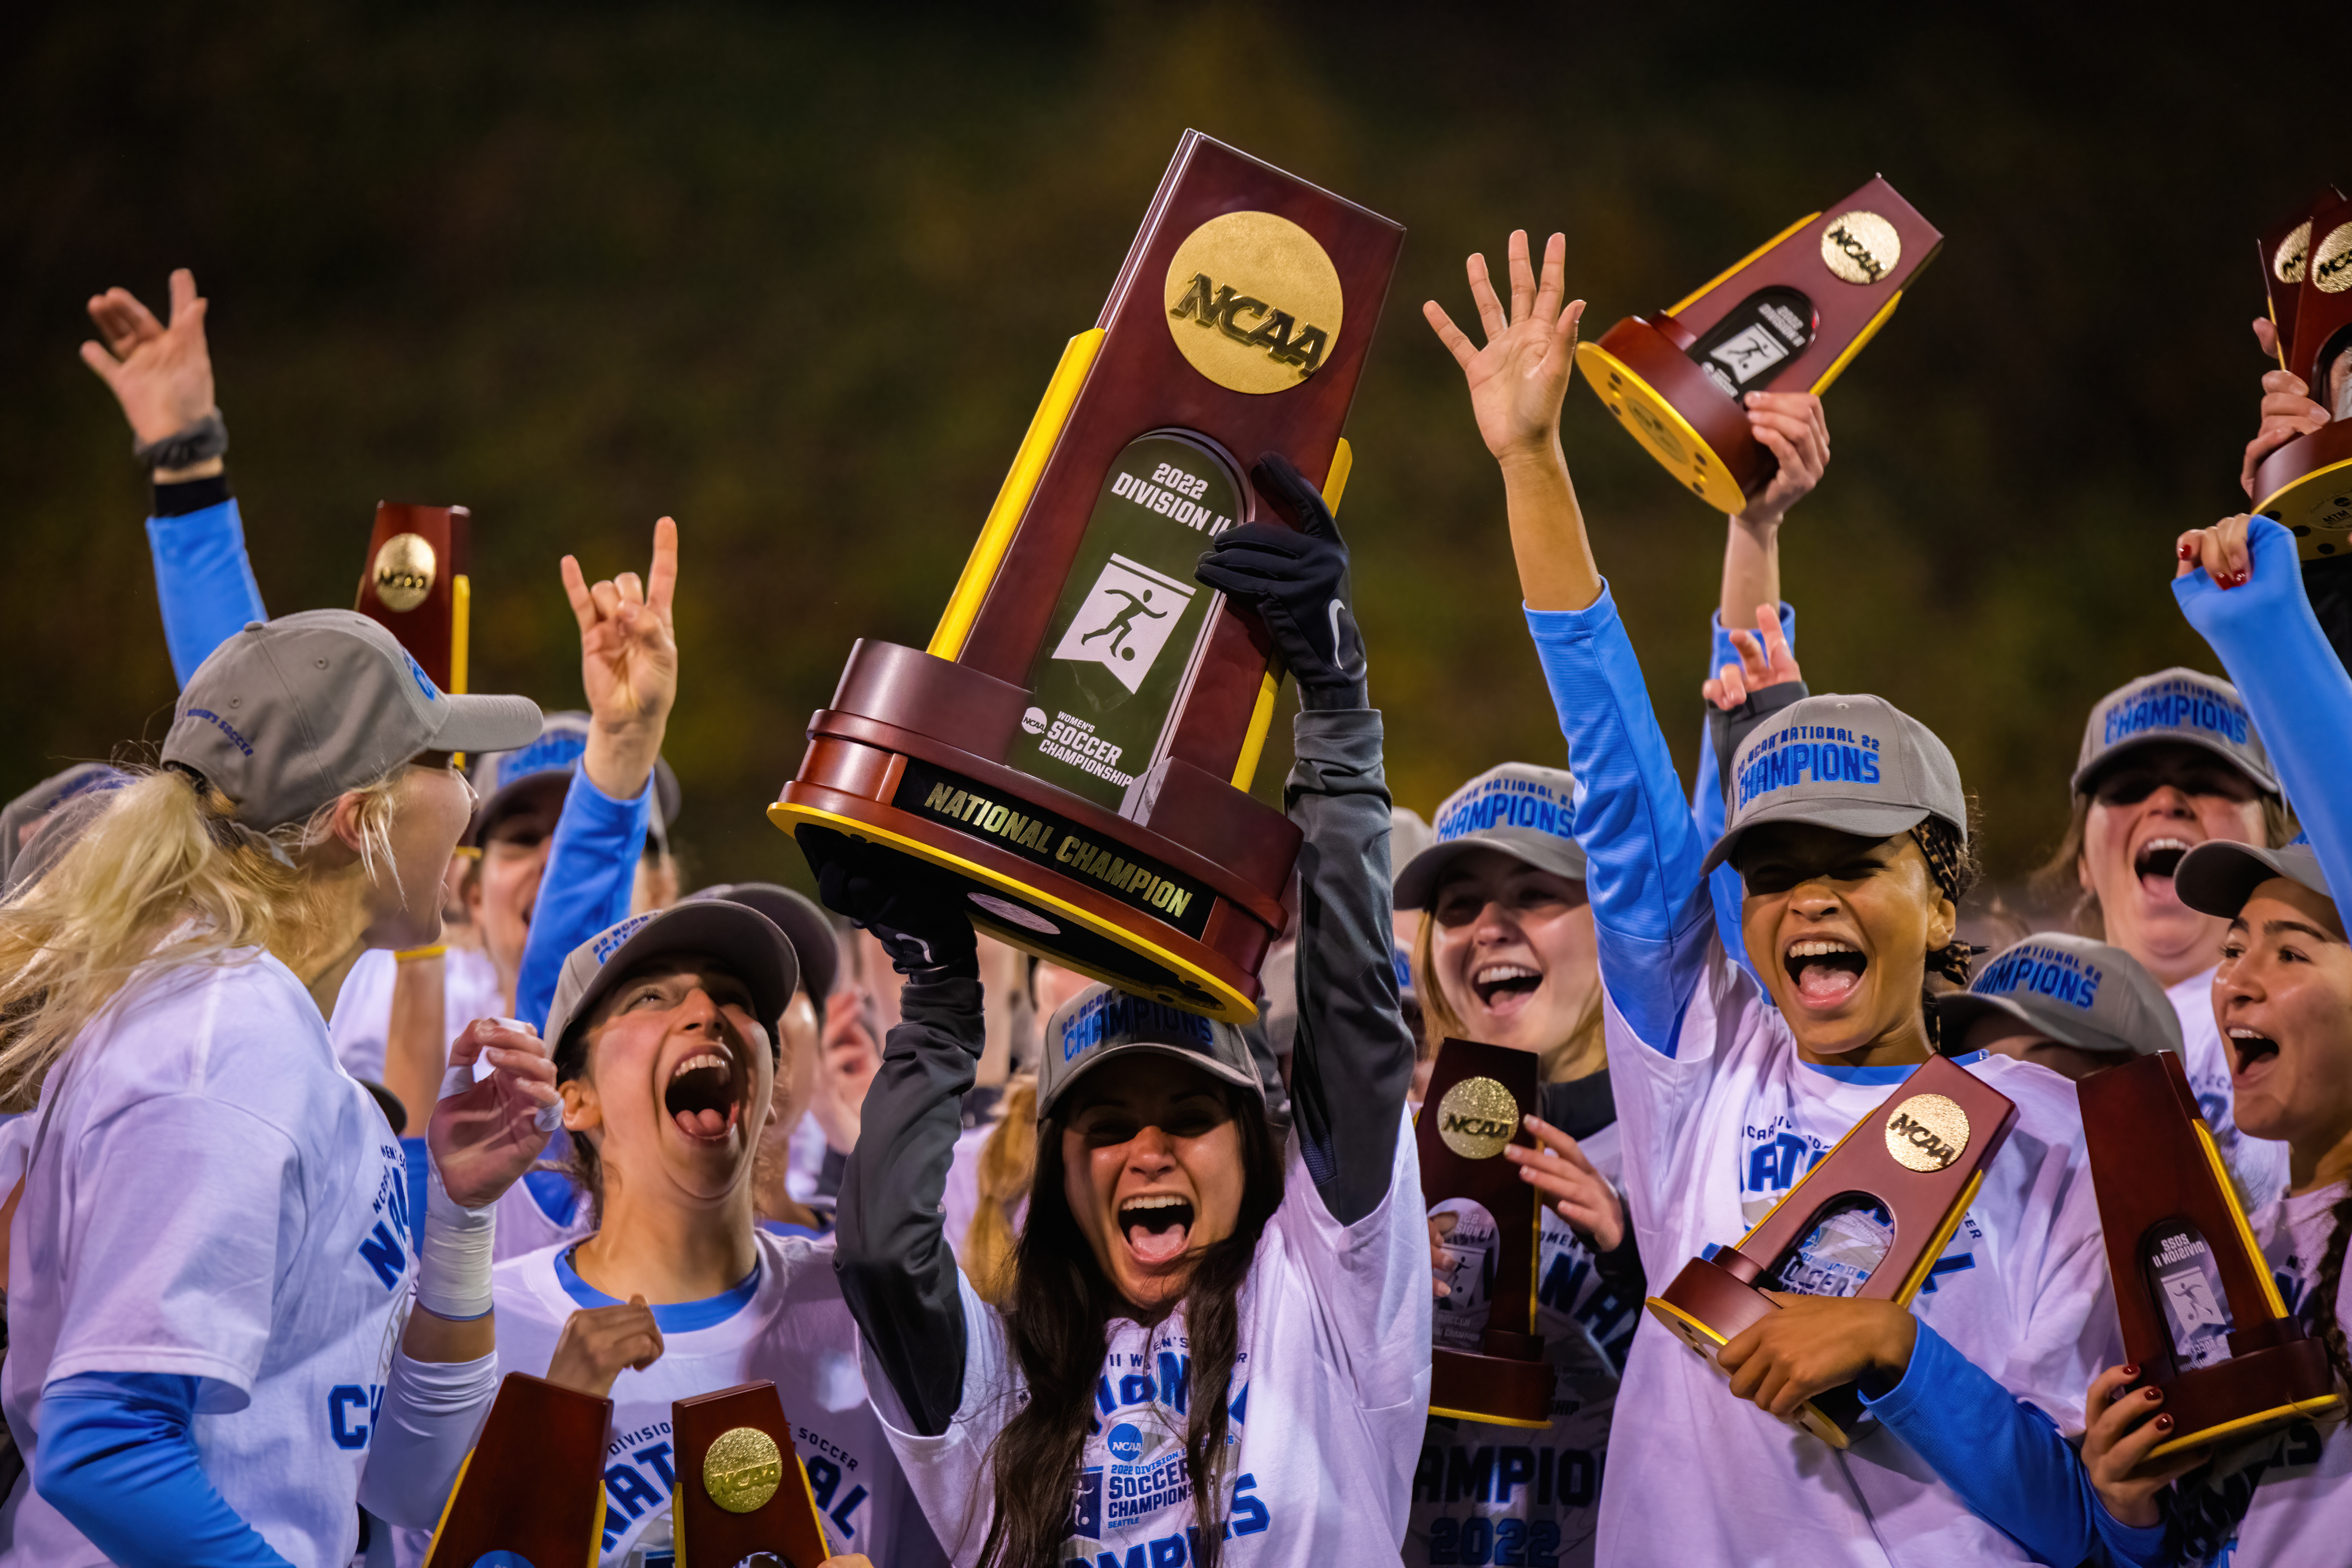 Western women's soccer team cheers and hoists their trophies after winning the NCAA II national championships